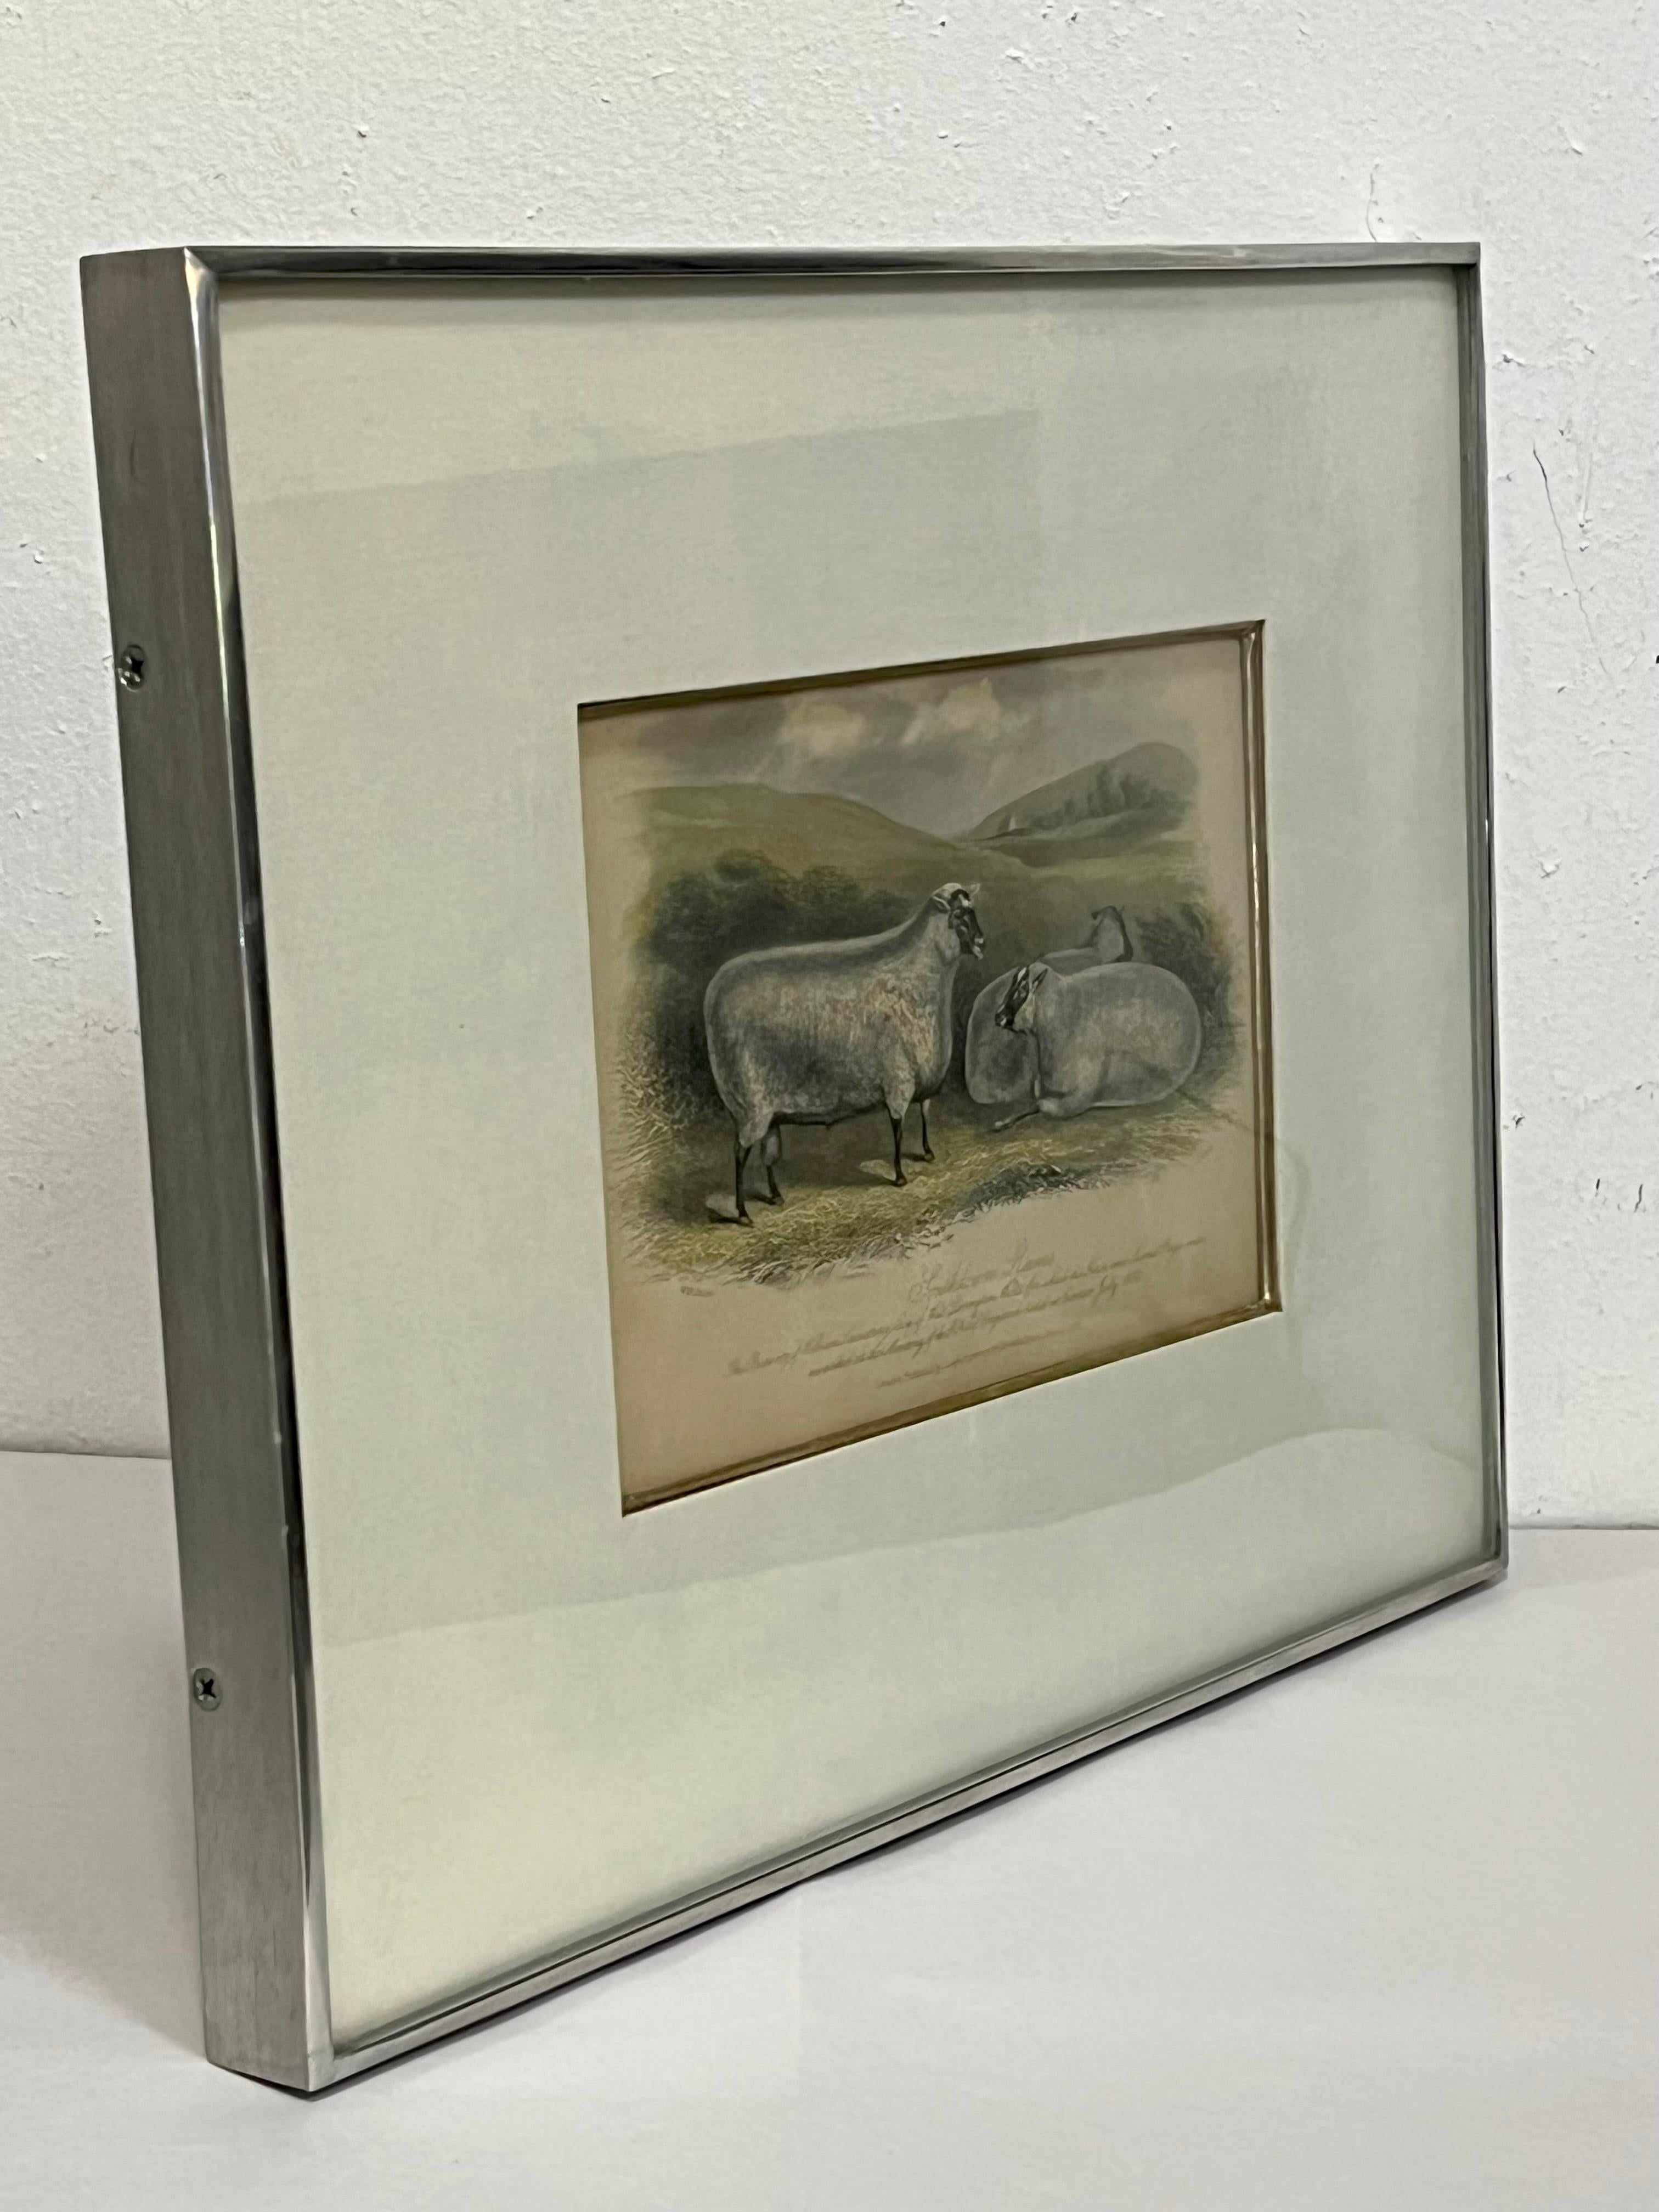 This is where the antique mixes with the modern. Where worlds collide and give rise to something fresh, new and unique. A mid 19th century British print by William Henry Davis presented in a Kulicke frame which had it's origins in the mid 20th